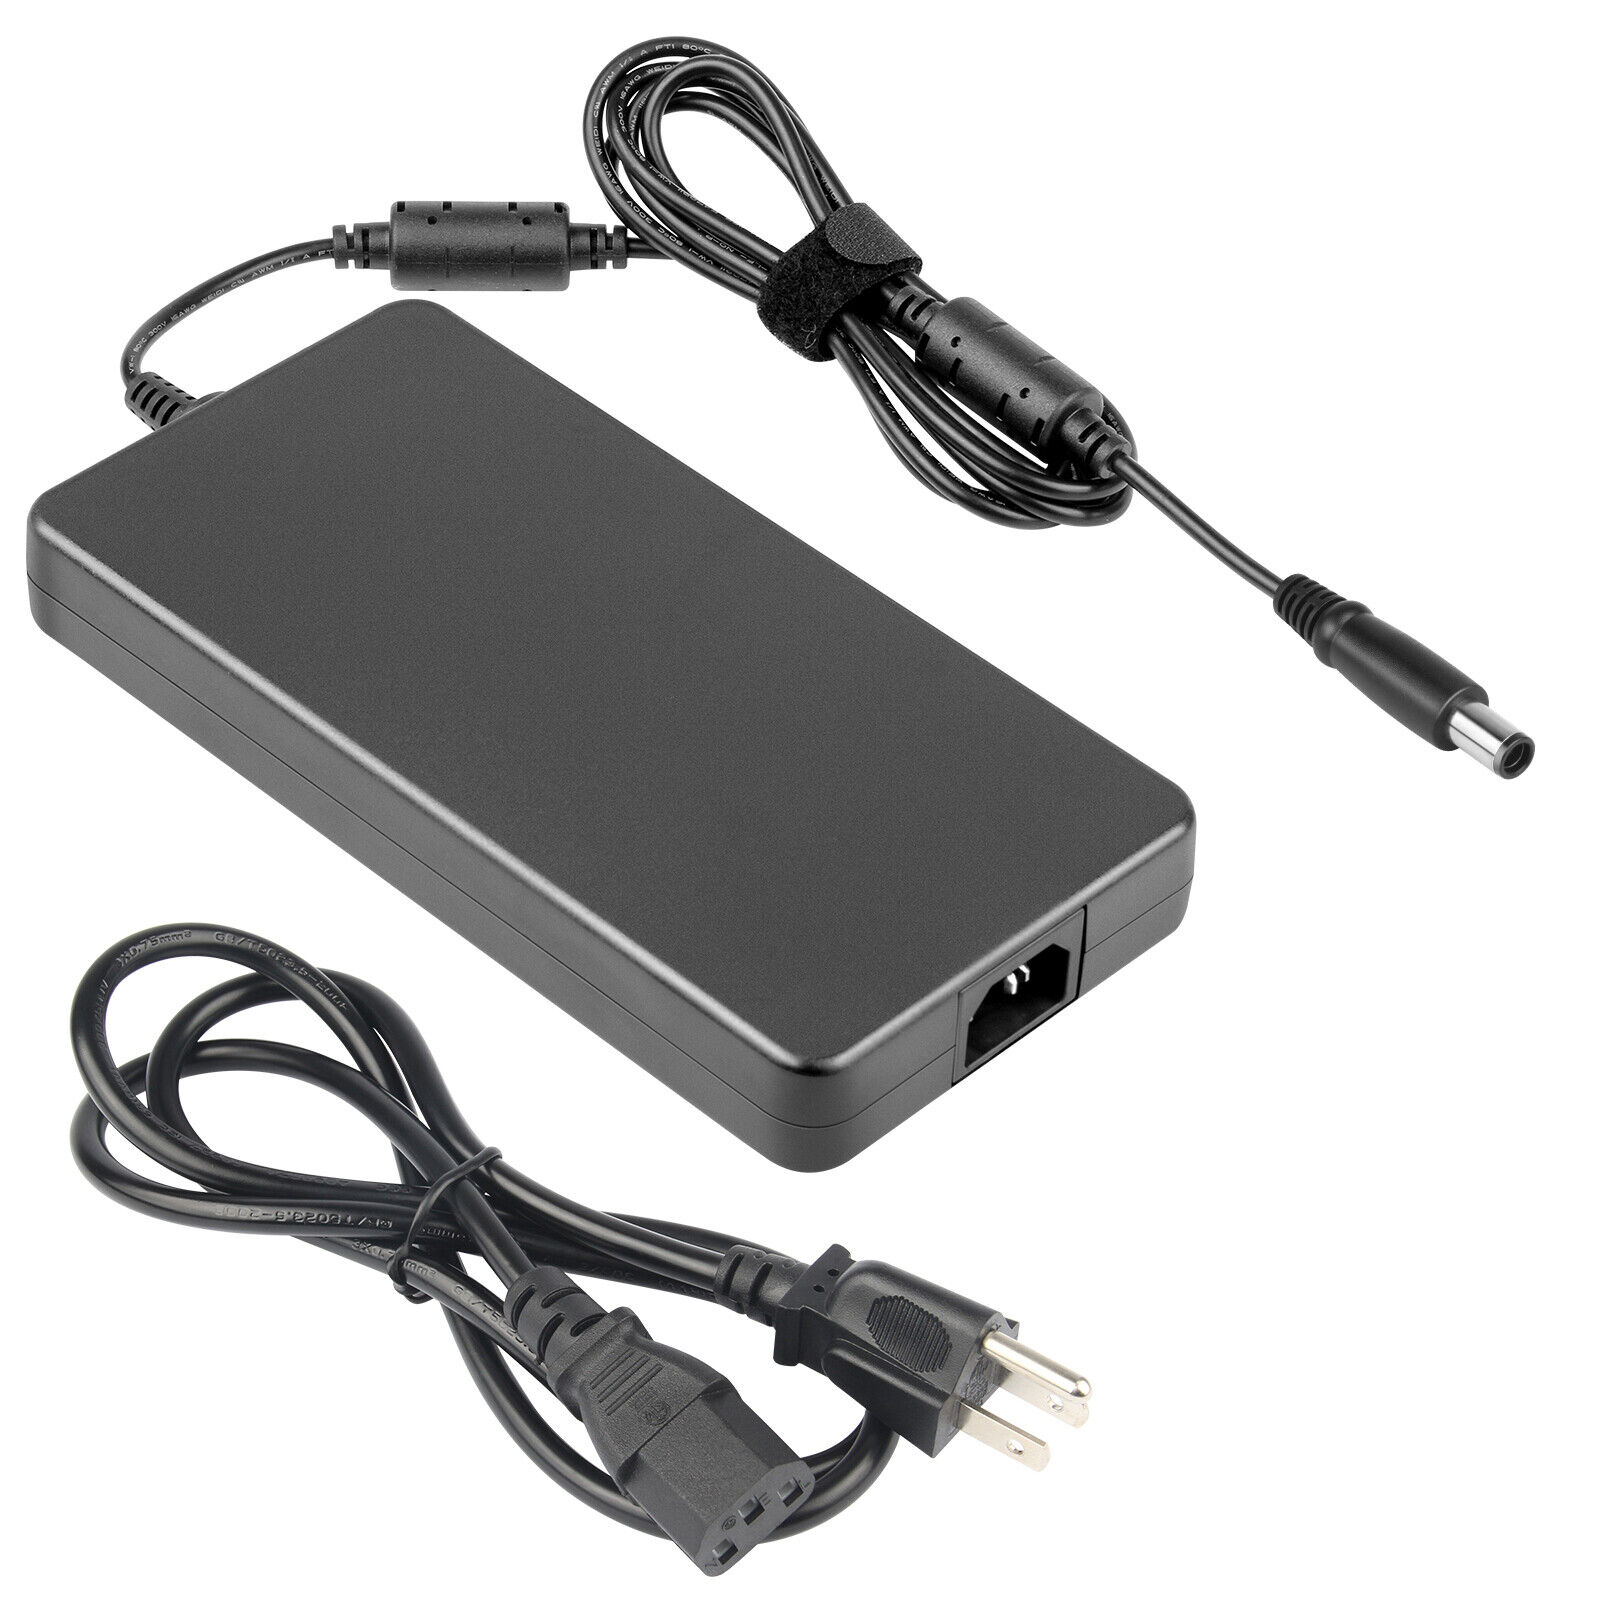 230W AC Adapter Charger W/Cord For HP ZBook 15 G1 G2 & 17 G1 G2 Notebook 7.4*5.0